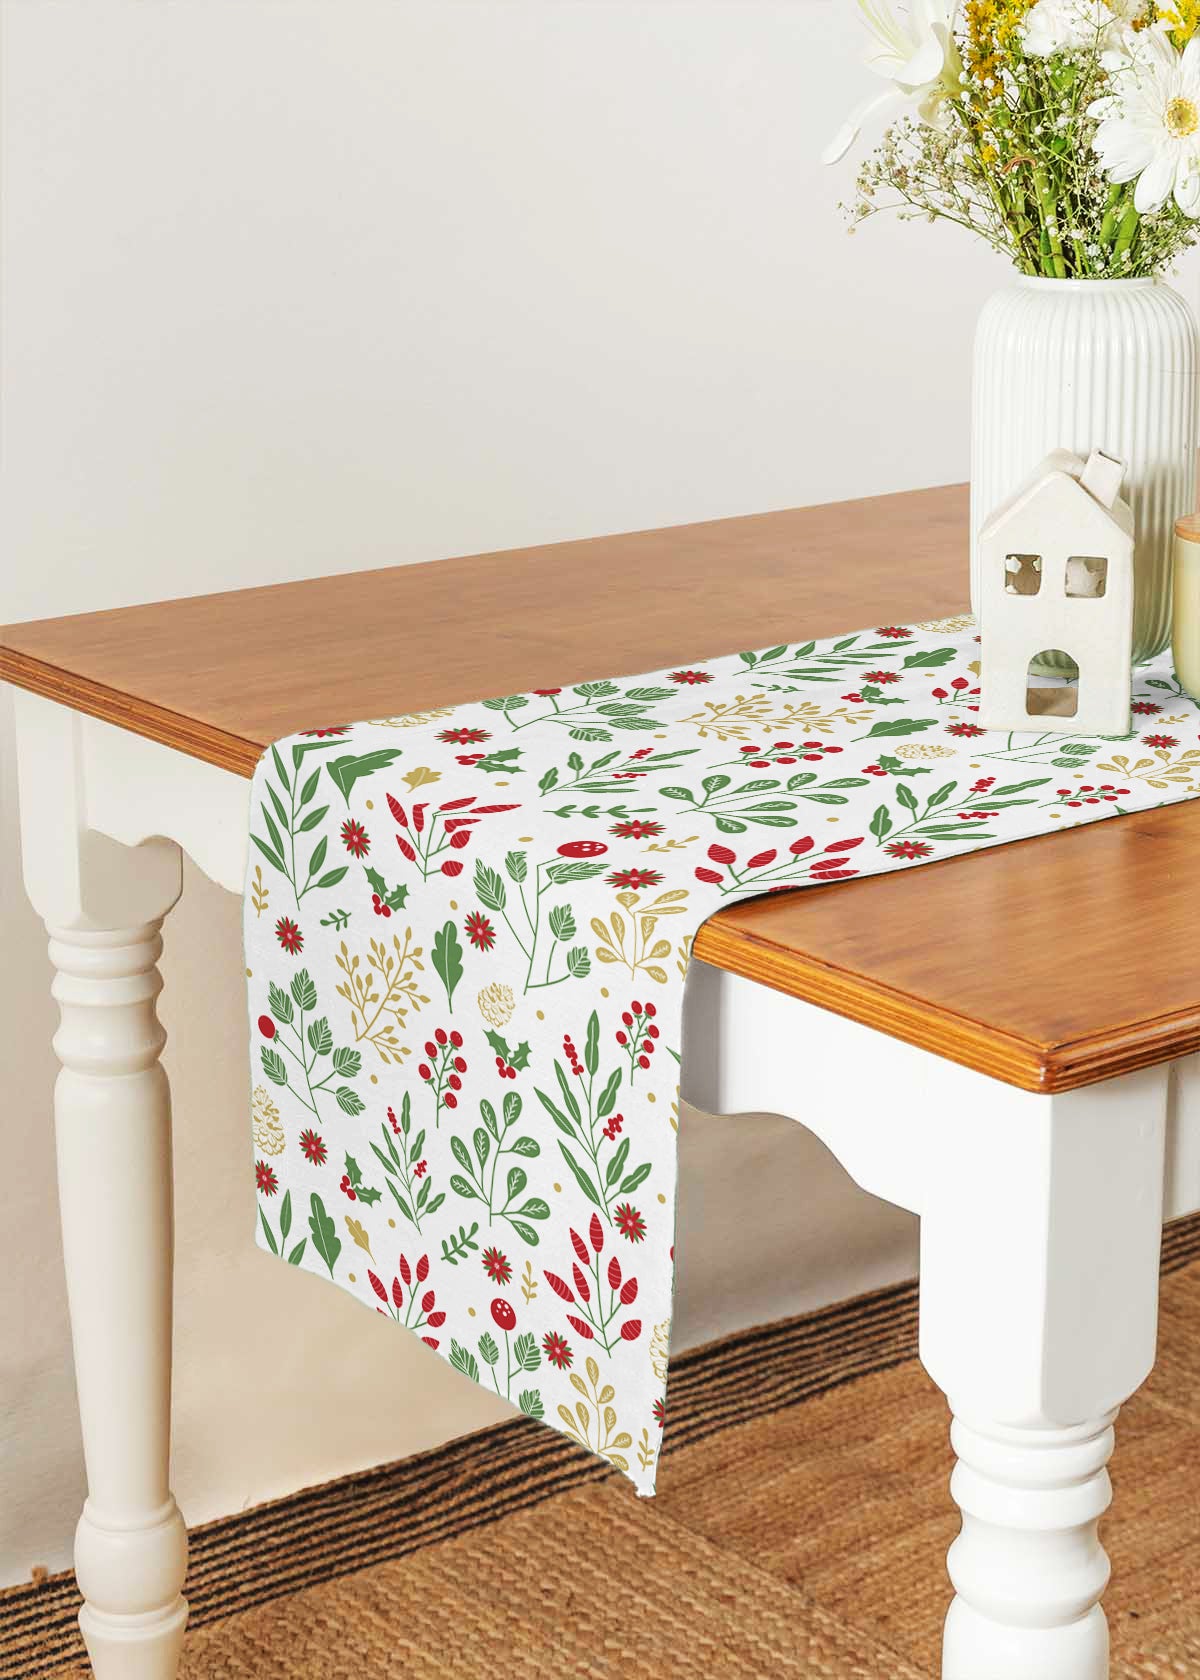 Foraged Berries Printed Cotton Table Runner - Multicolor